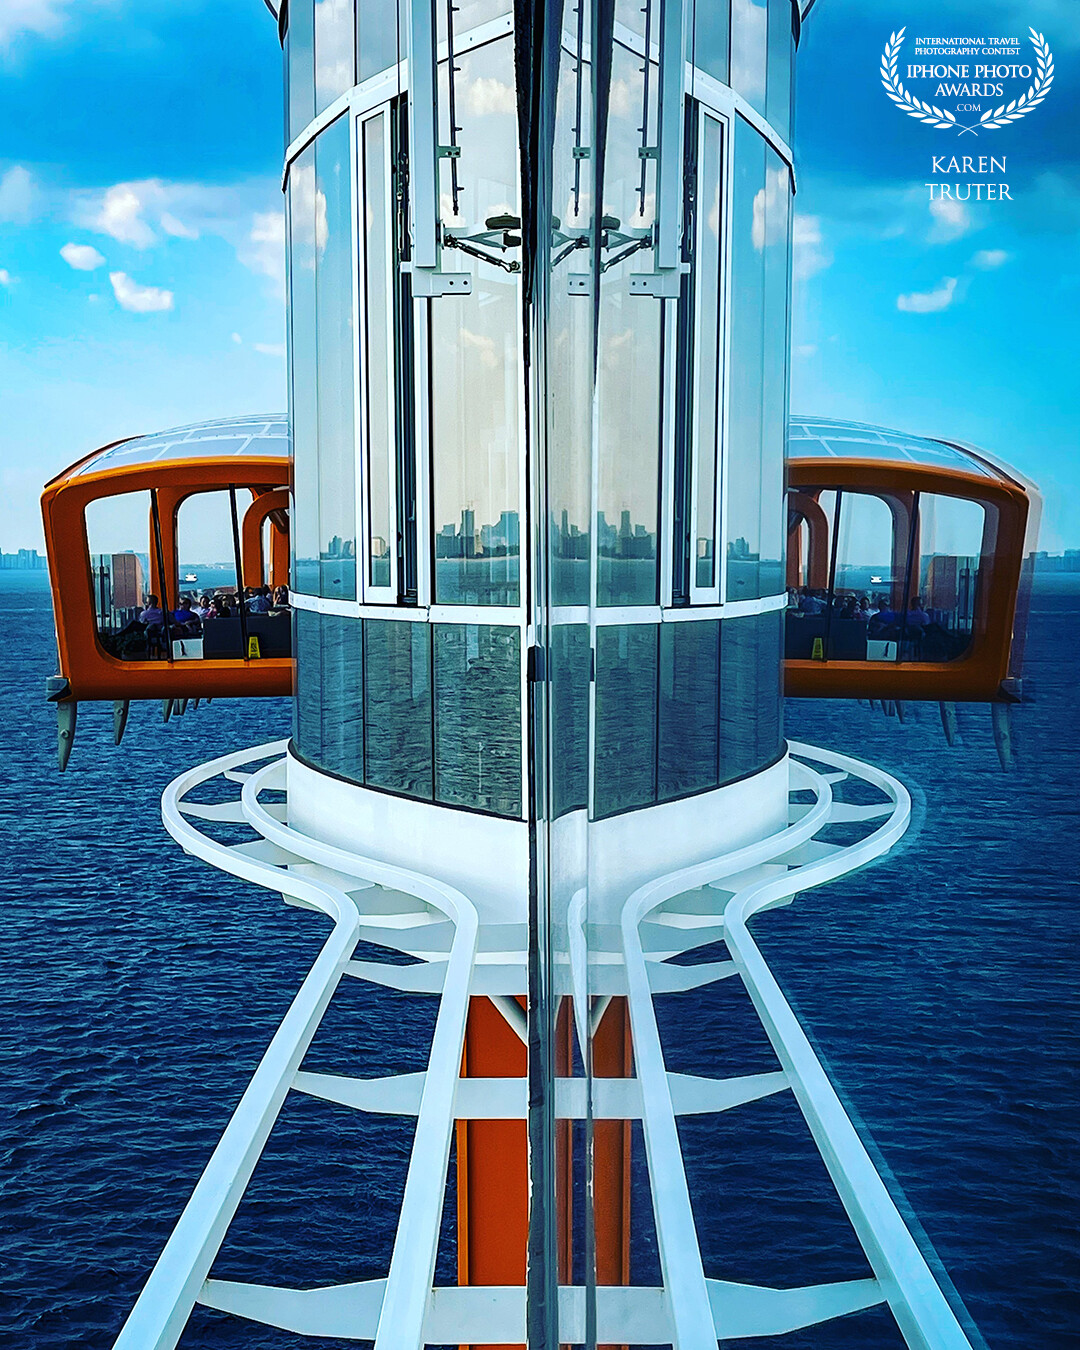 The orange platform restaurant is called the ‘Magic Carpet’ on the Celebrity Apex cruise ship and hangs over the side suspended over the ocean. I rested my camera against the window to capture this mirror image as we sailed out of Fort Lauderdale.